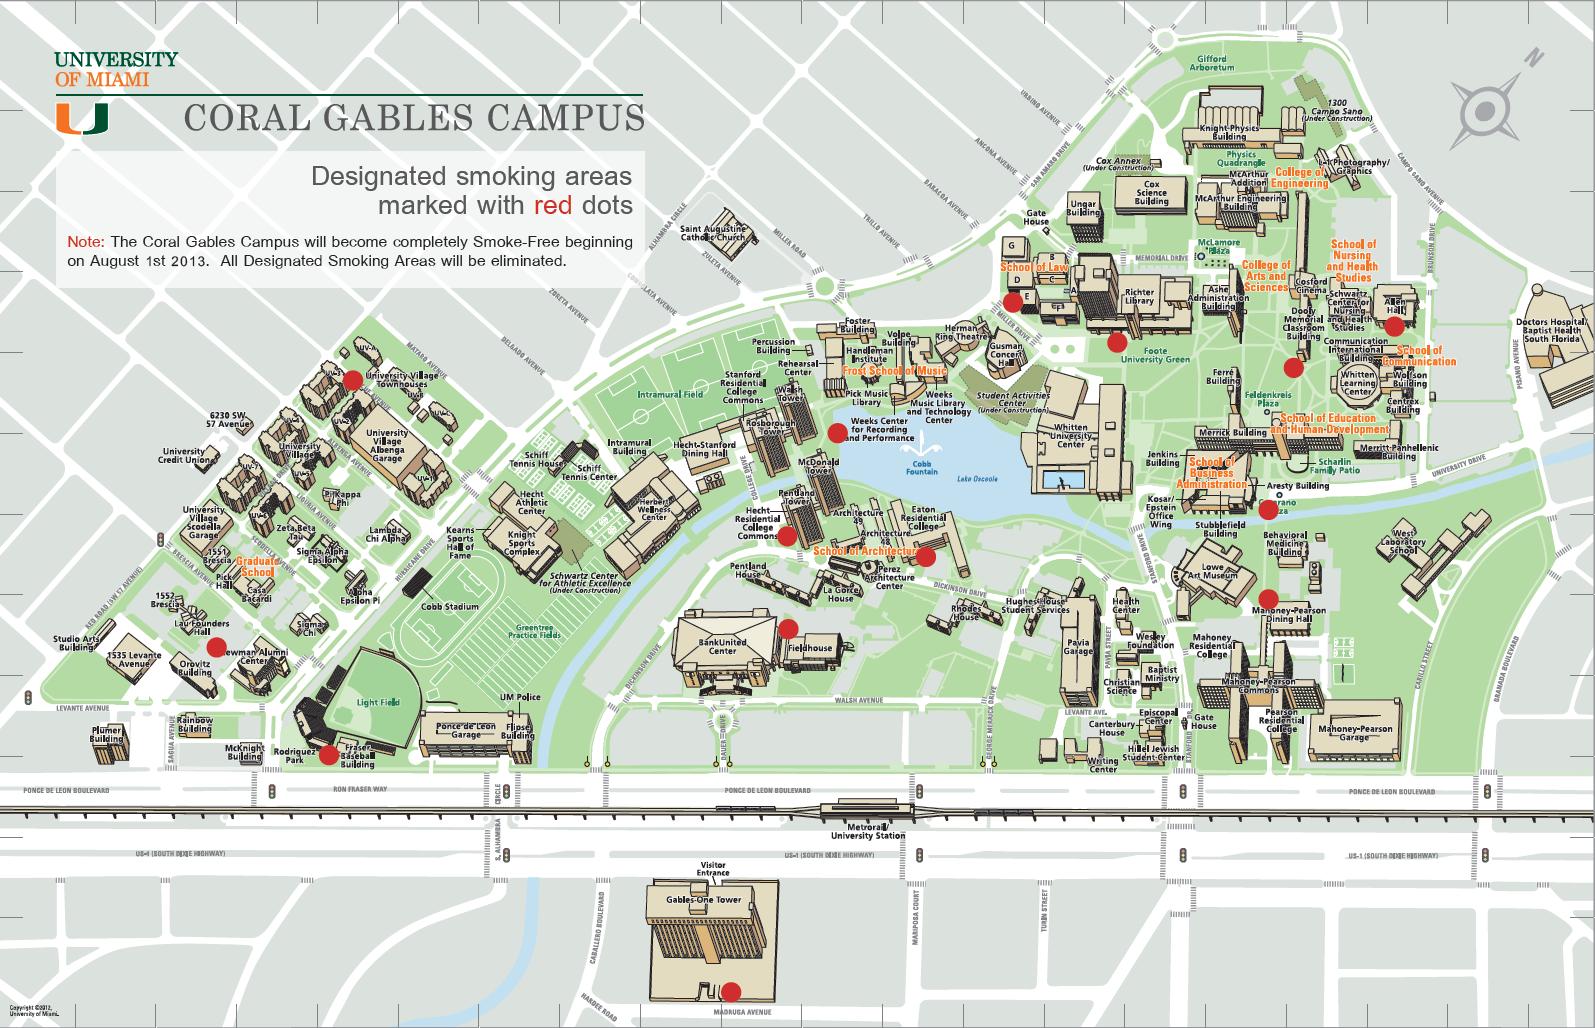 university of miami campus map 2019 Enforcing A Restricted Smoking Policy On The Um Campus A Tsp university of miami campus map 2019